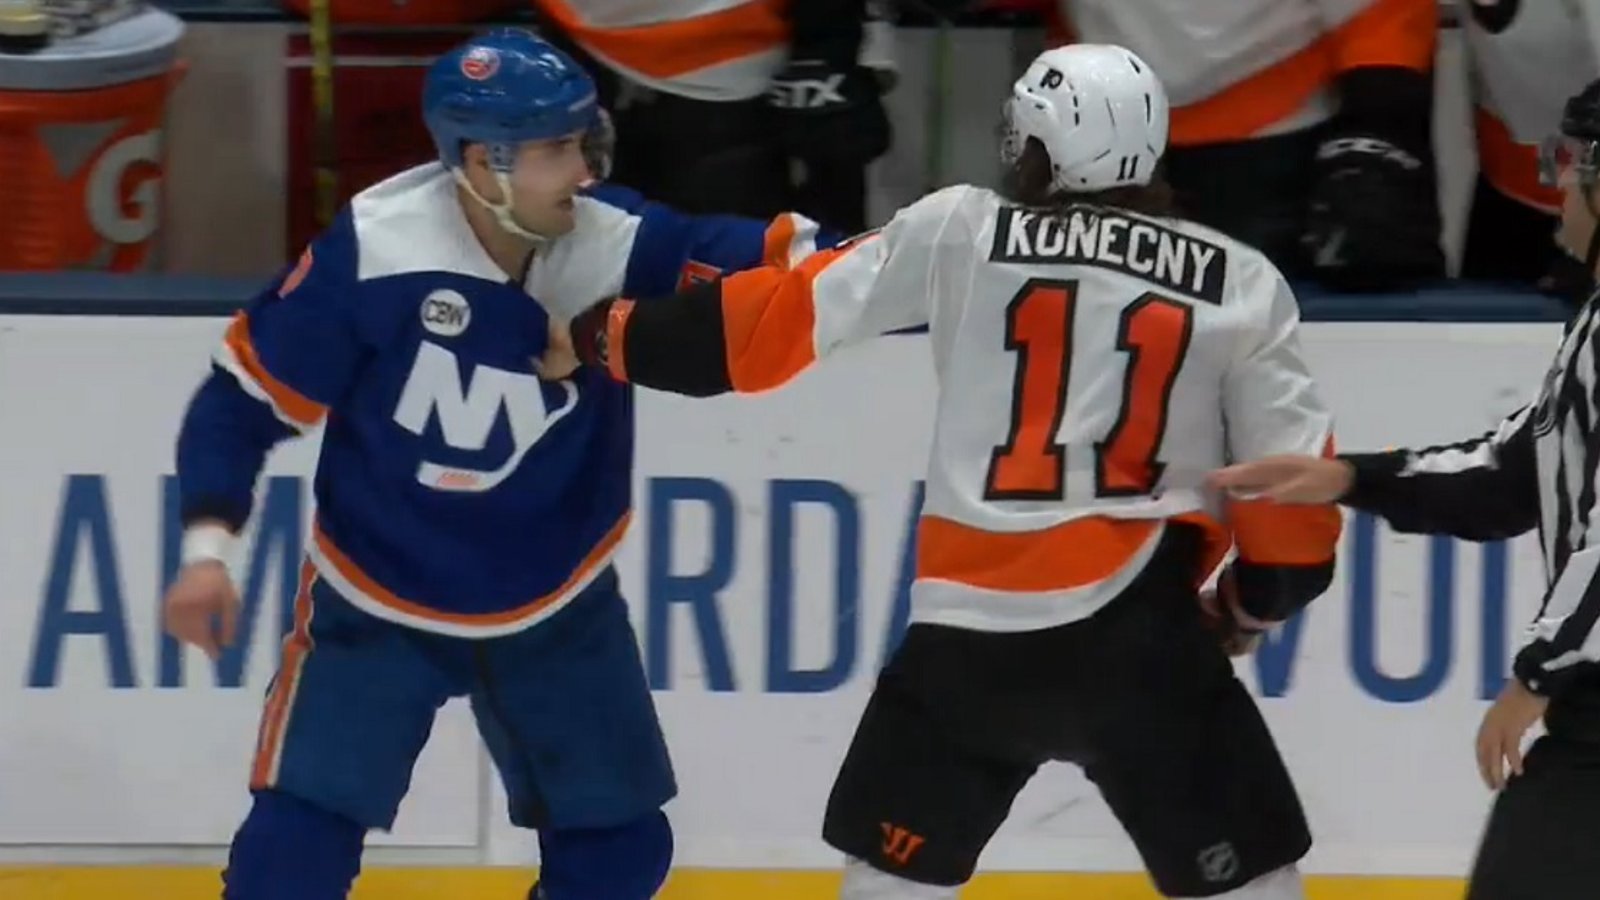 Eberle and Konecny drop the gloves and go to war.